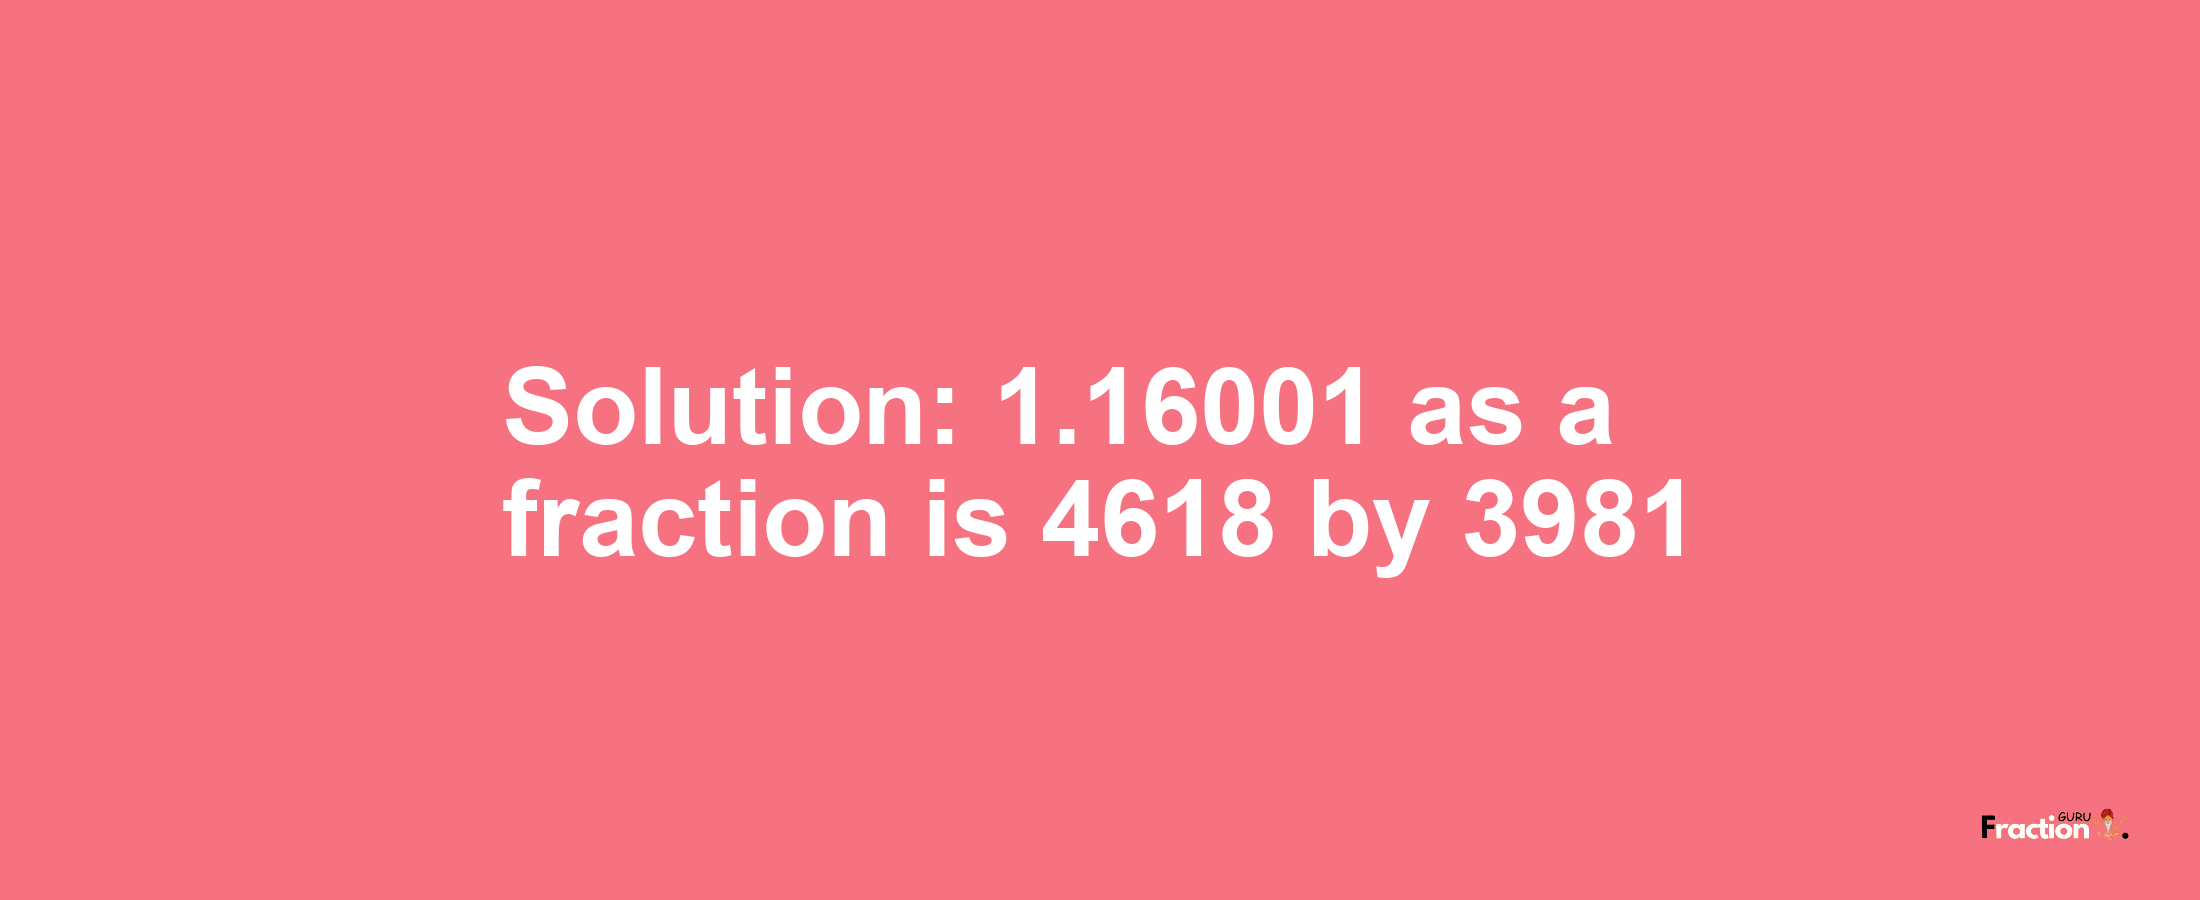 Solution:1.16001 as a fraction is 4618/3981